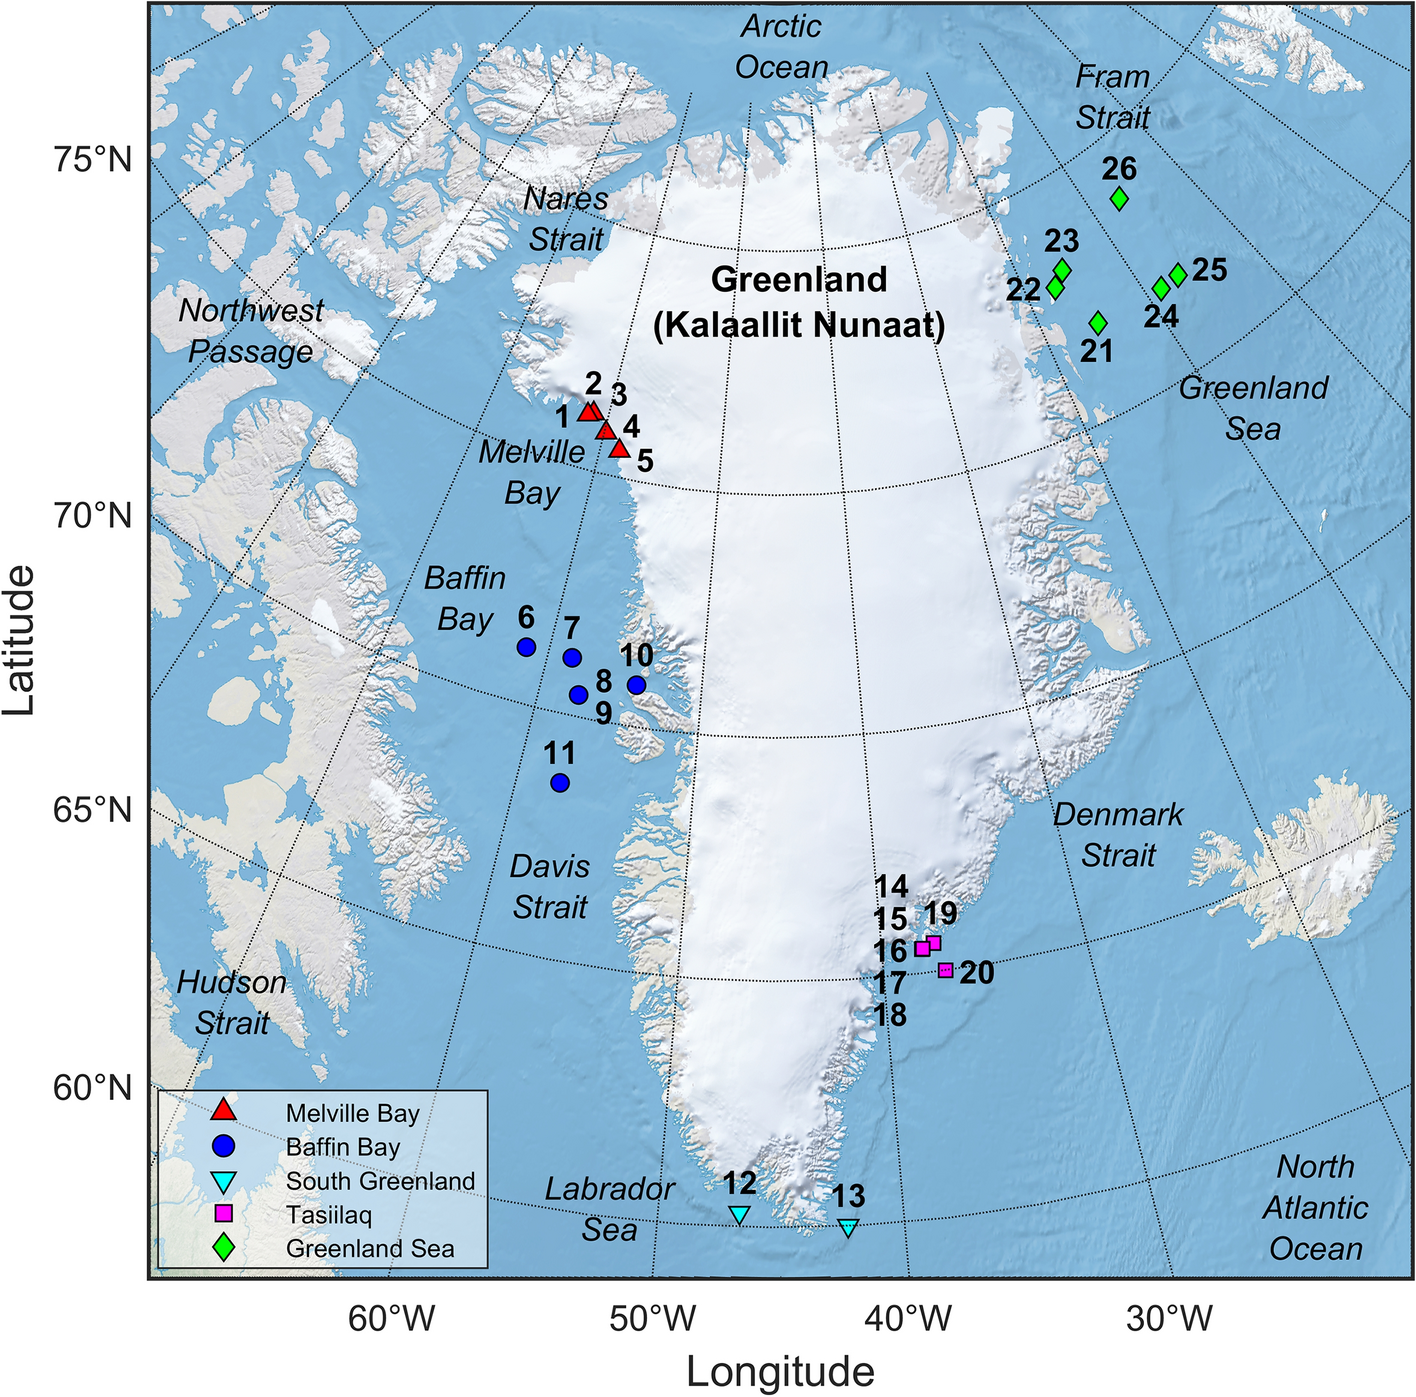 Soundscape noise levels of the Arctic waters around Greenland Scientific Reports